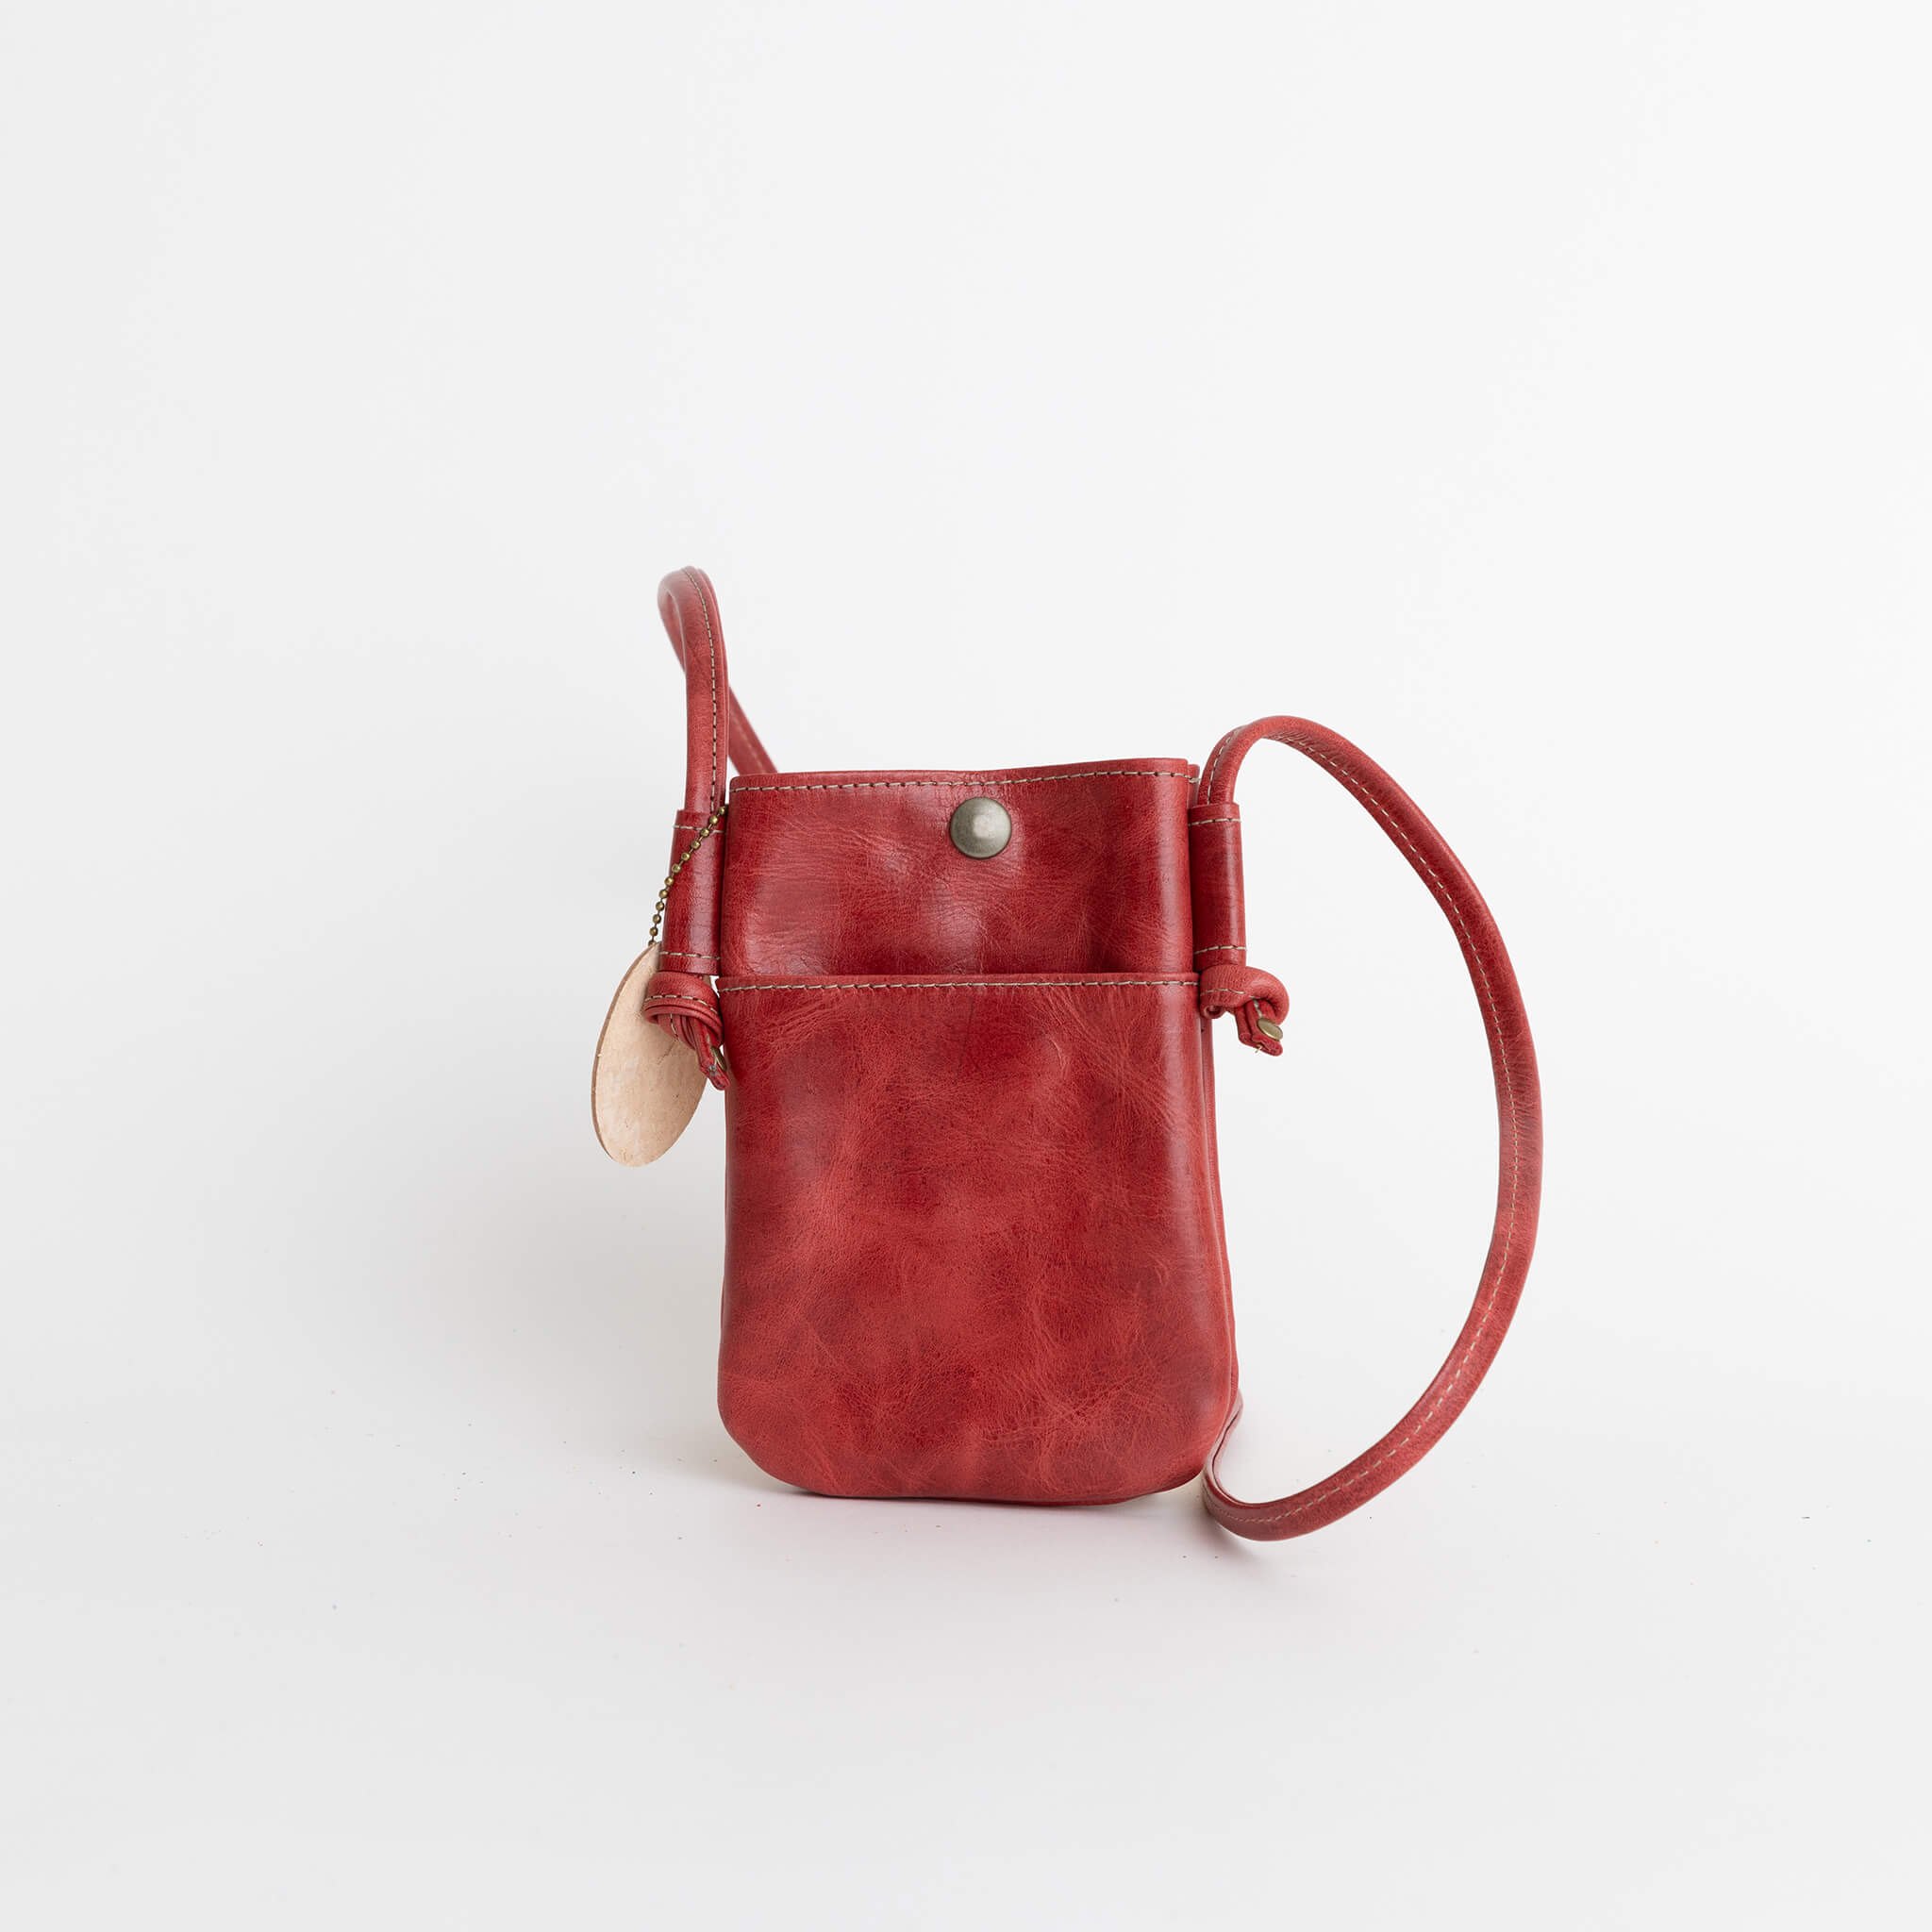 thompson crossbody pouch - handmade leather - cardinal front view